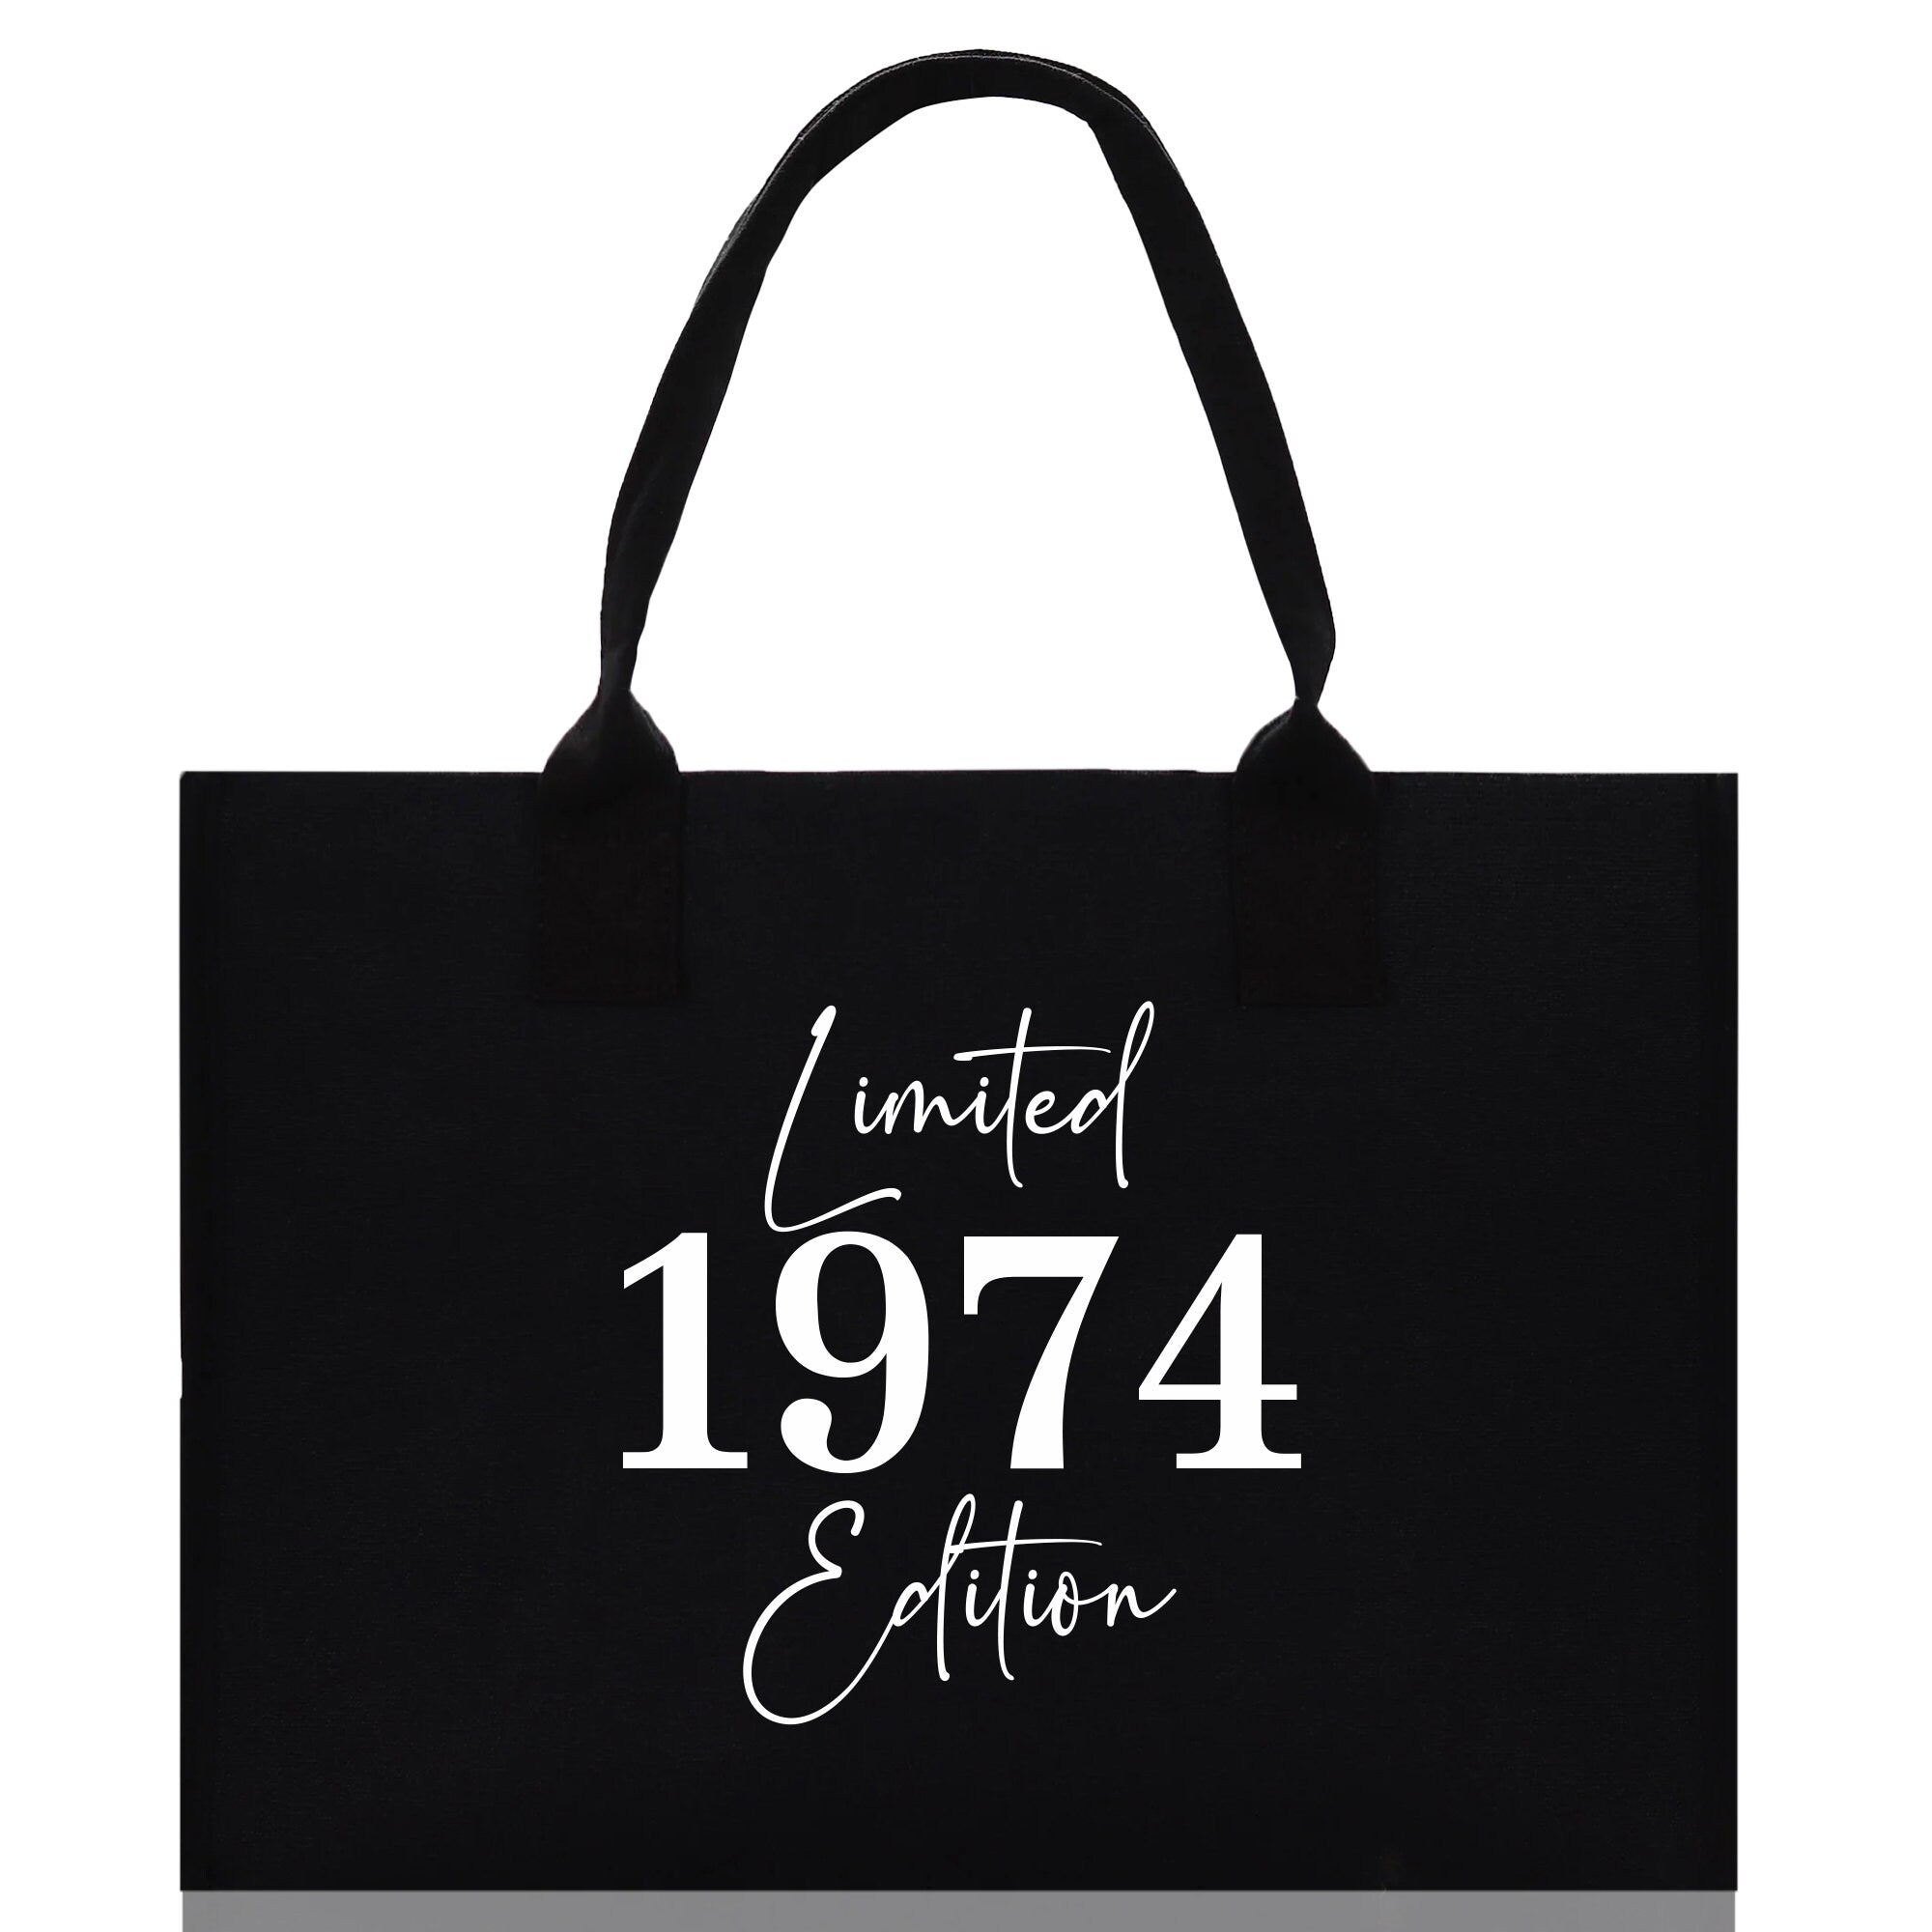 a black tote bag with white lettering on it